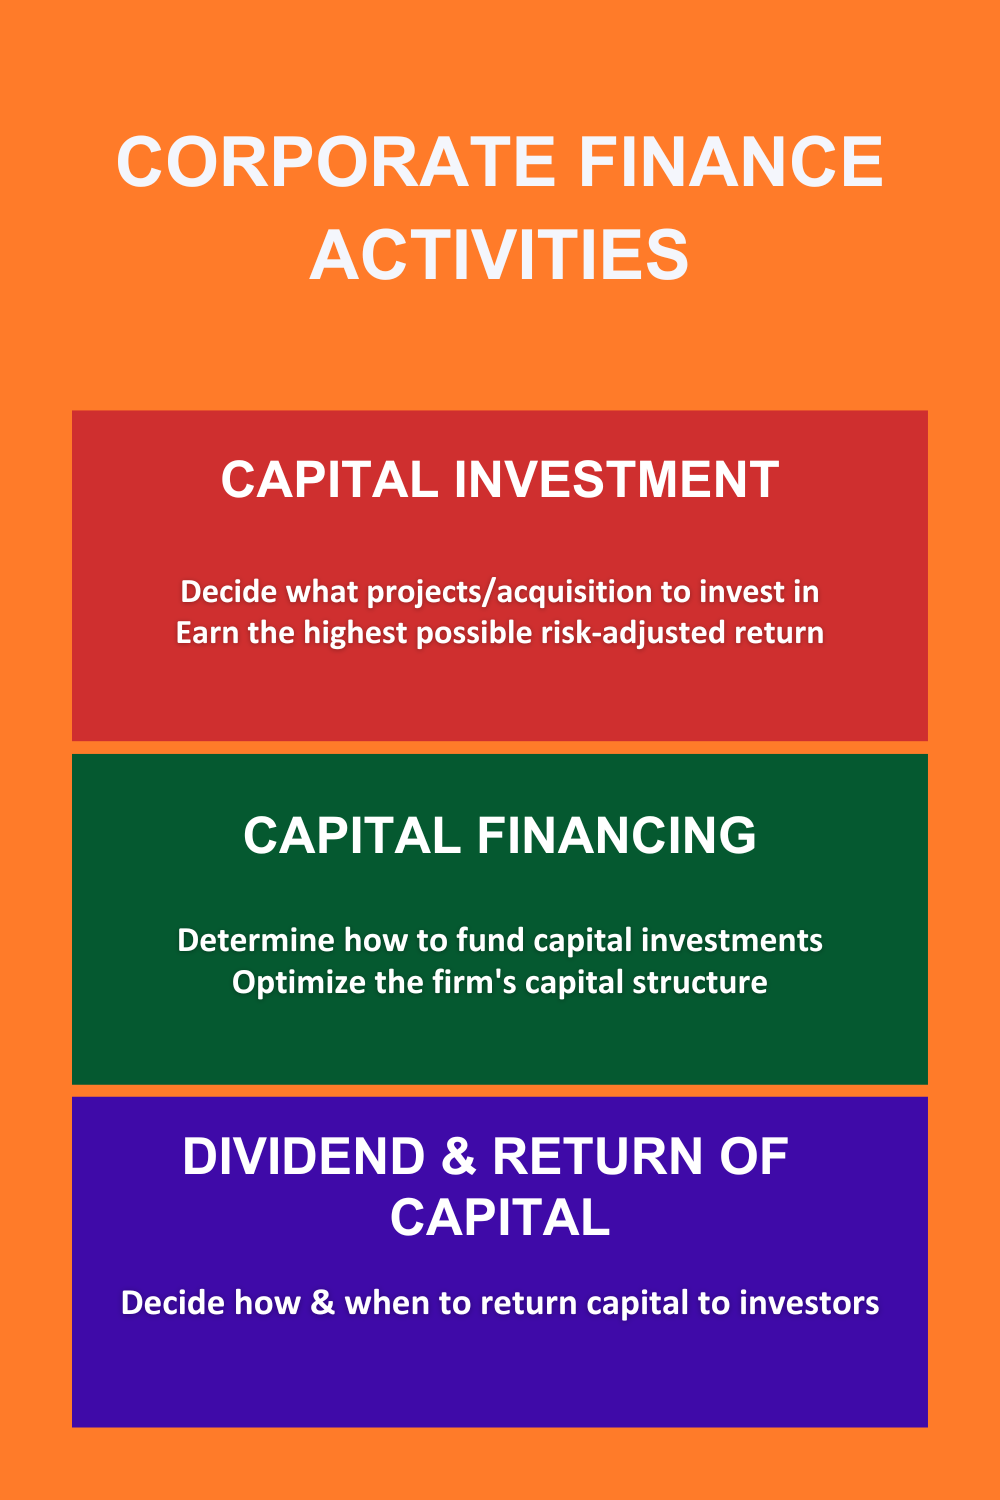 Elements of Corporate Finance Image